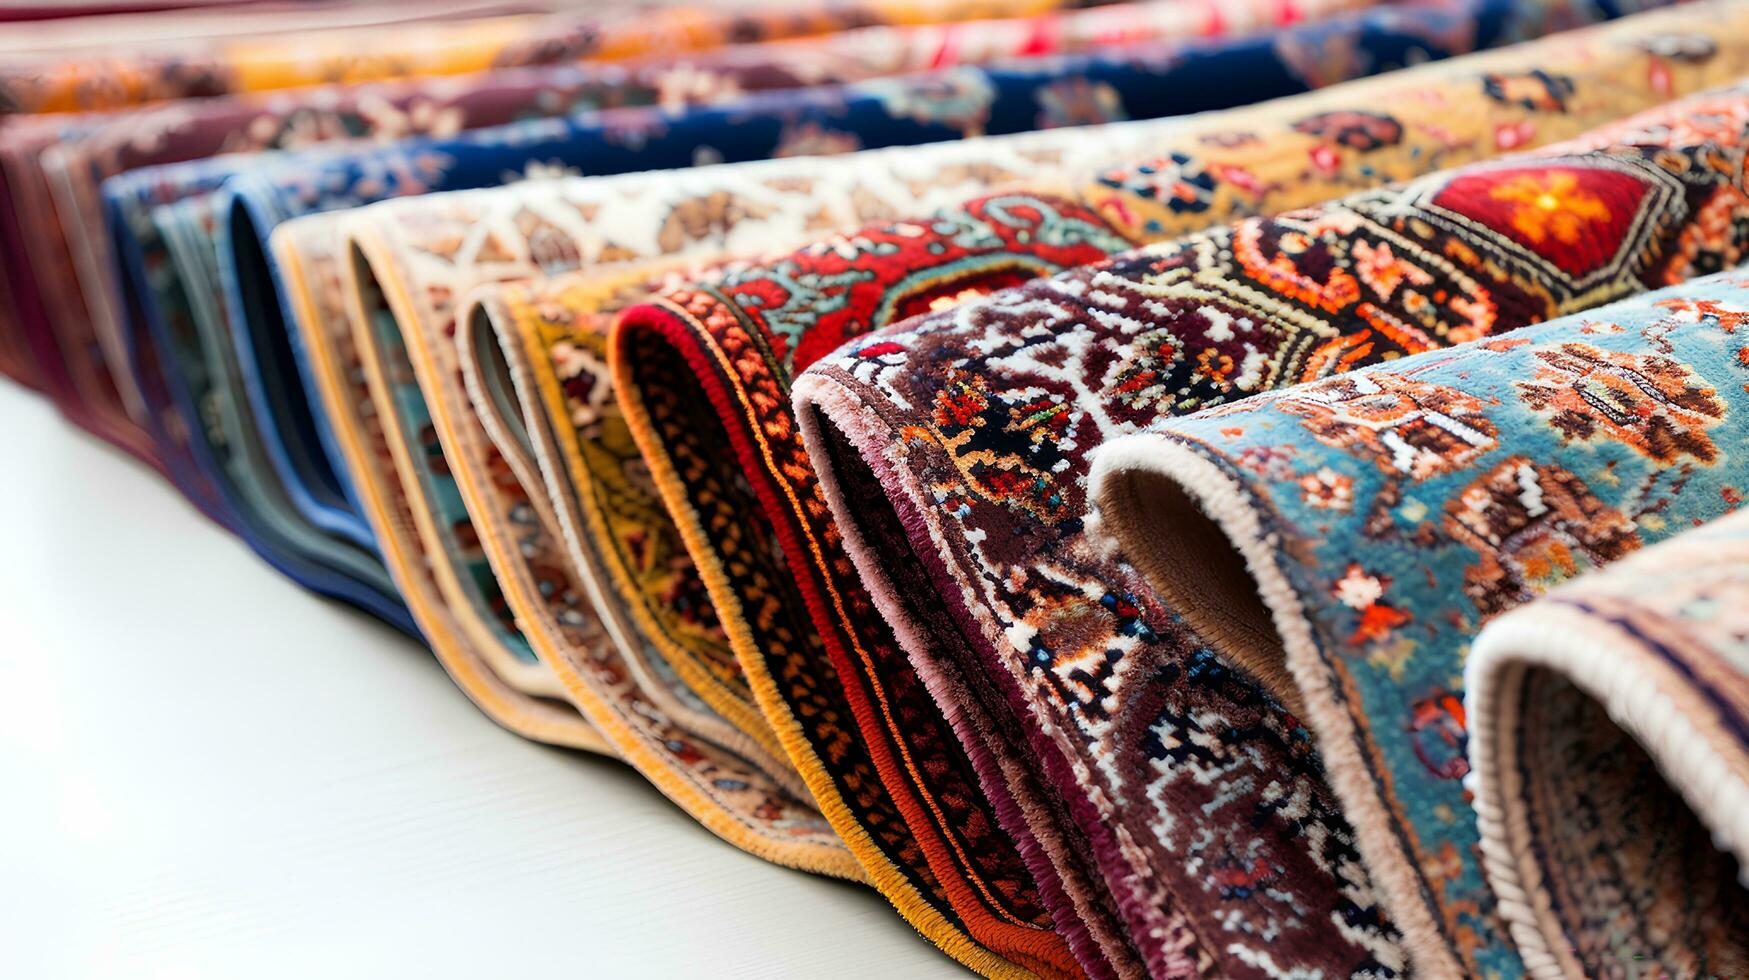 Rolled Persian carpets sale of bright carpets, photo shop